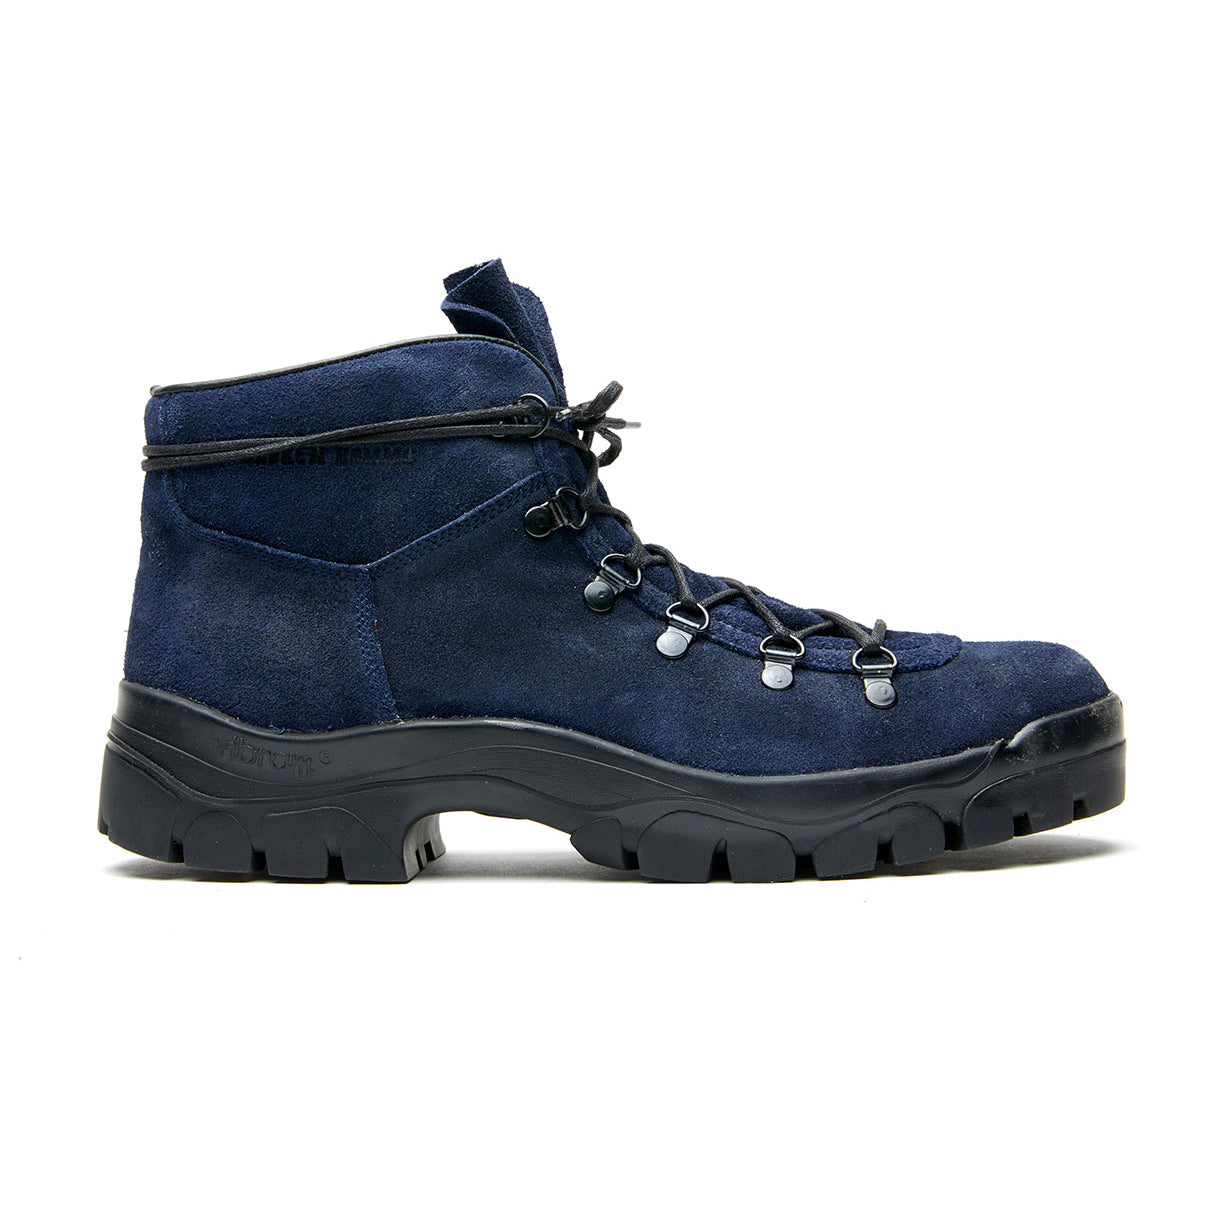 A Broken Homme Weber blue suede crossover boot on a white background.